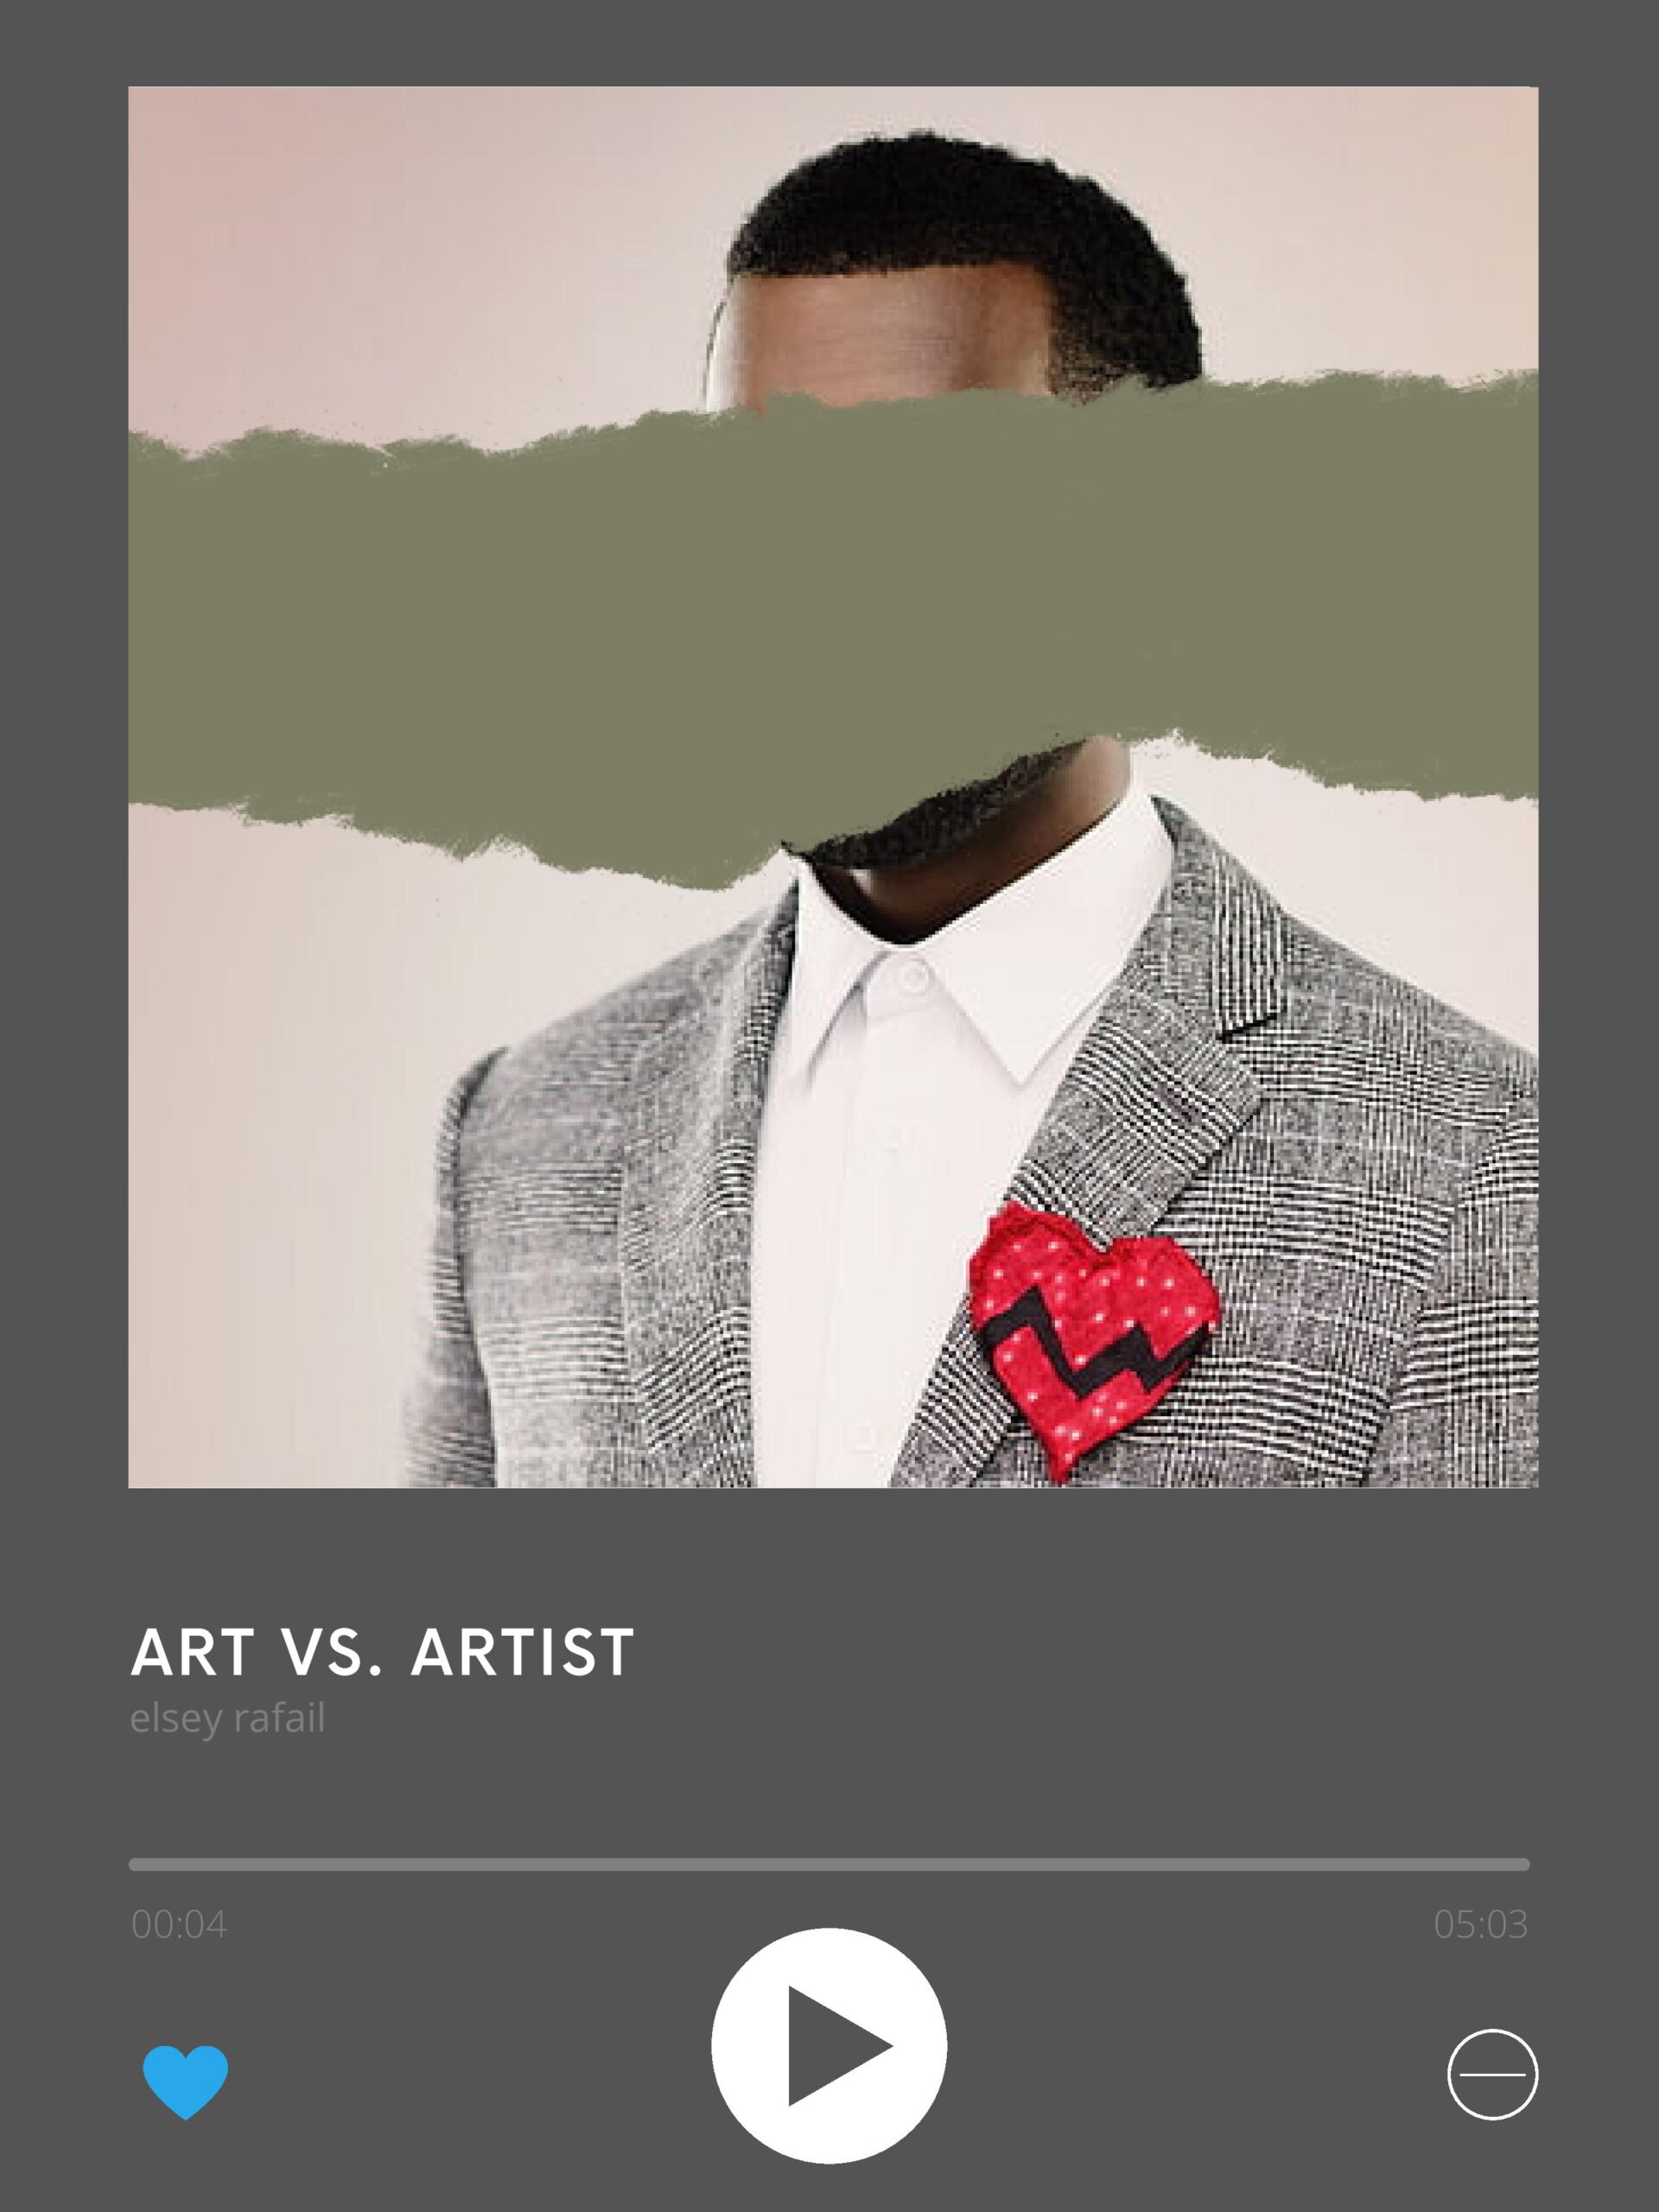 Why is listening to a problematic artist wrong?